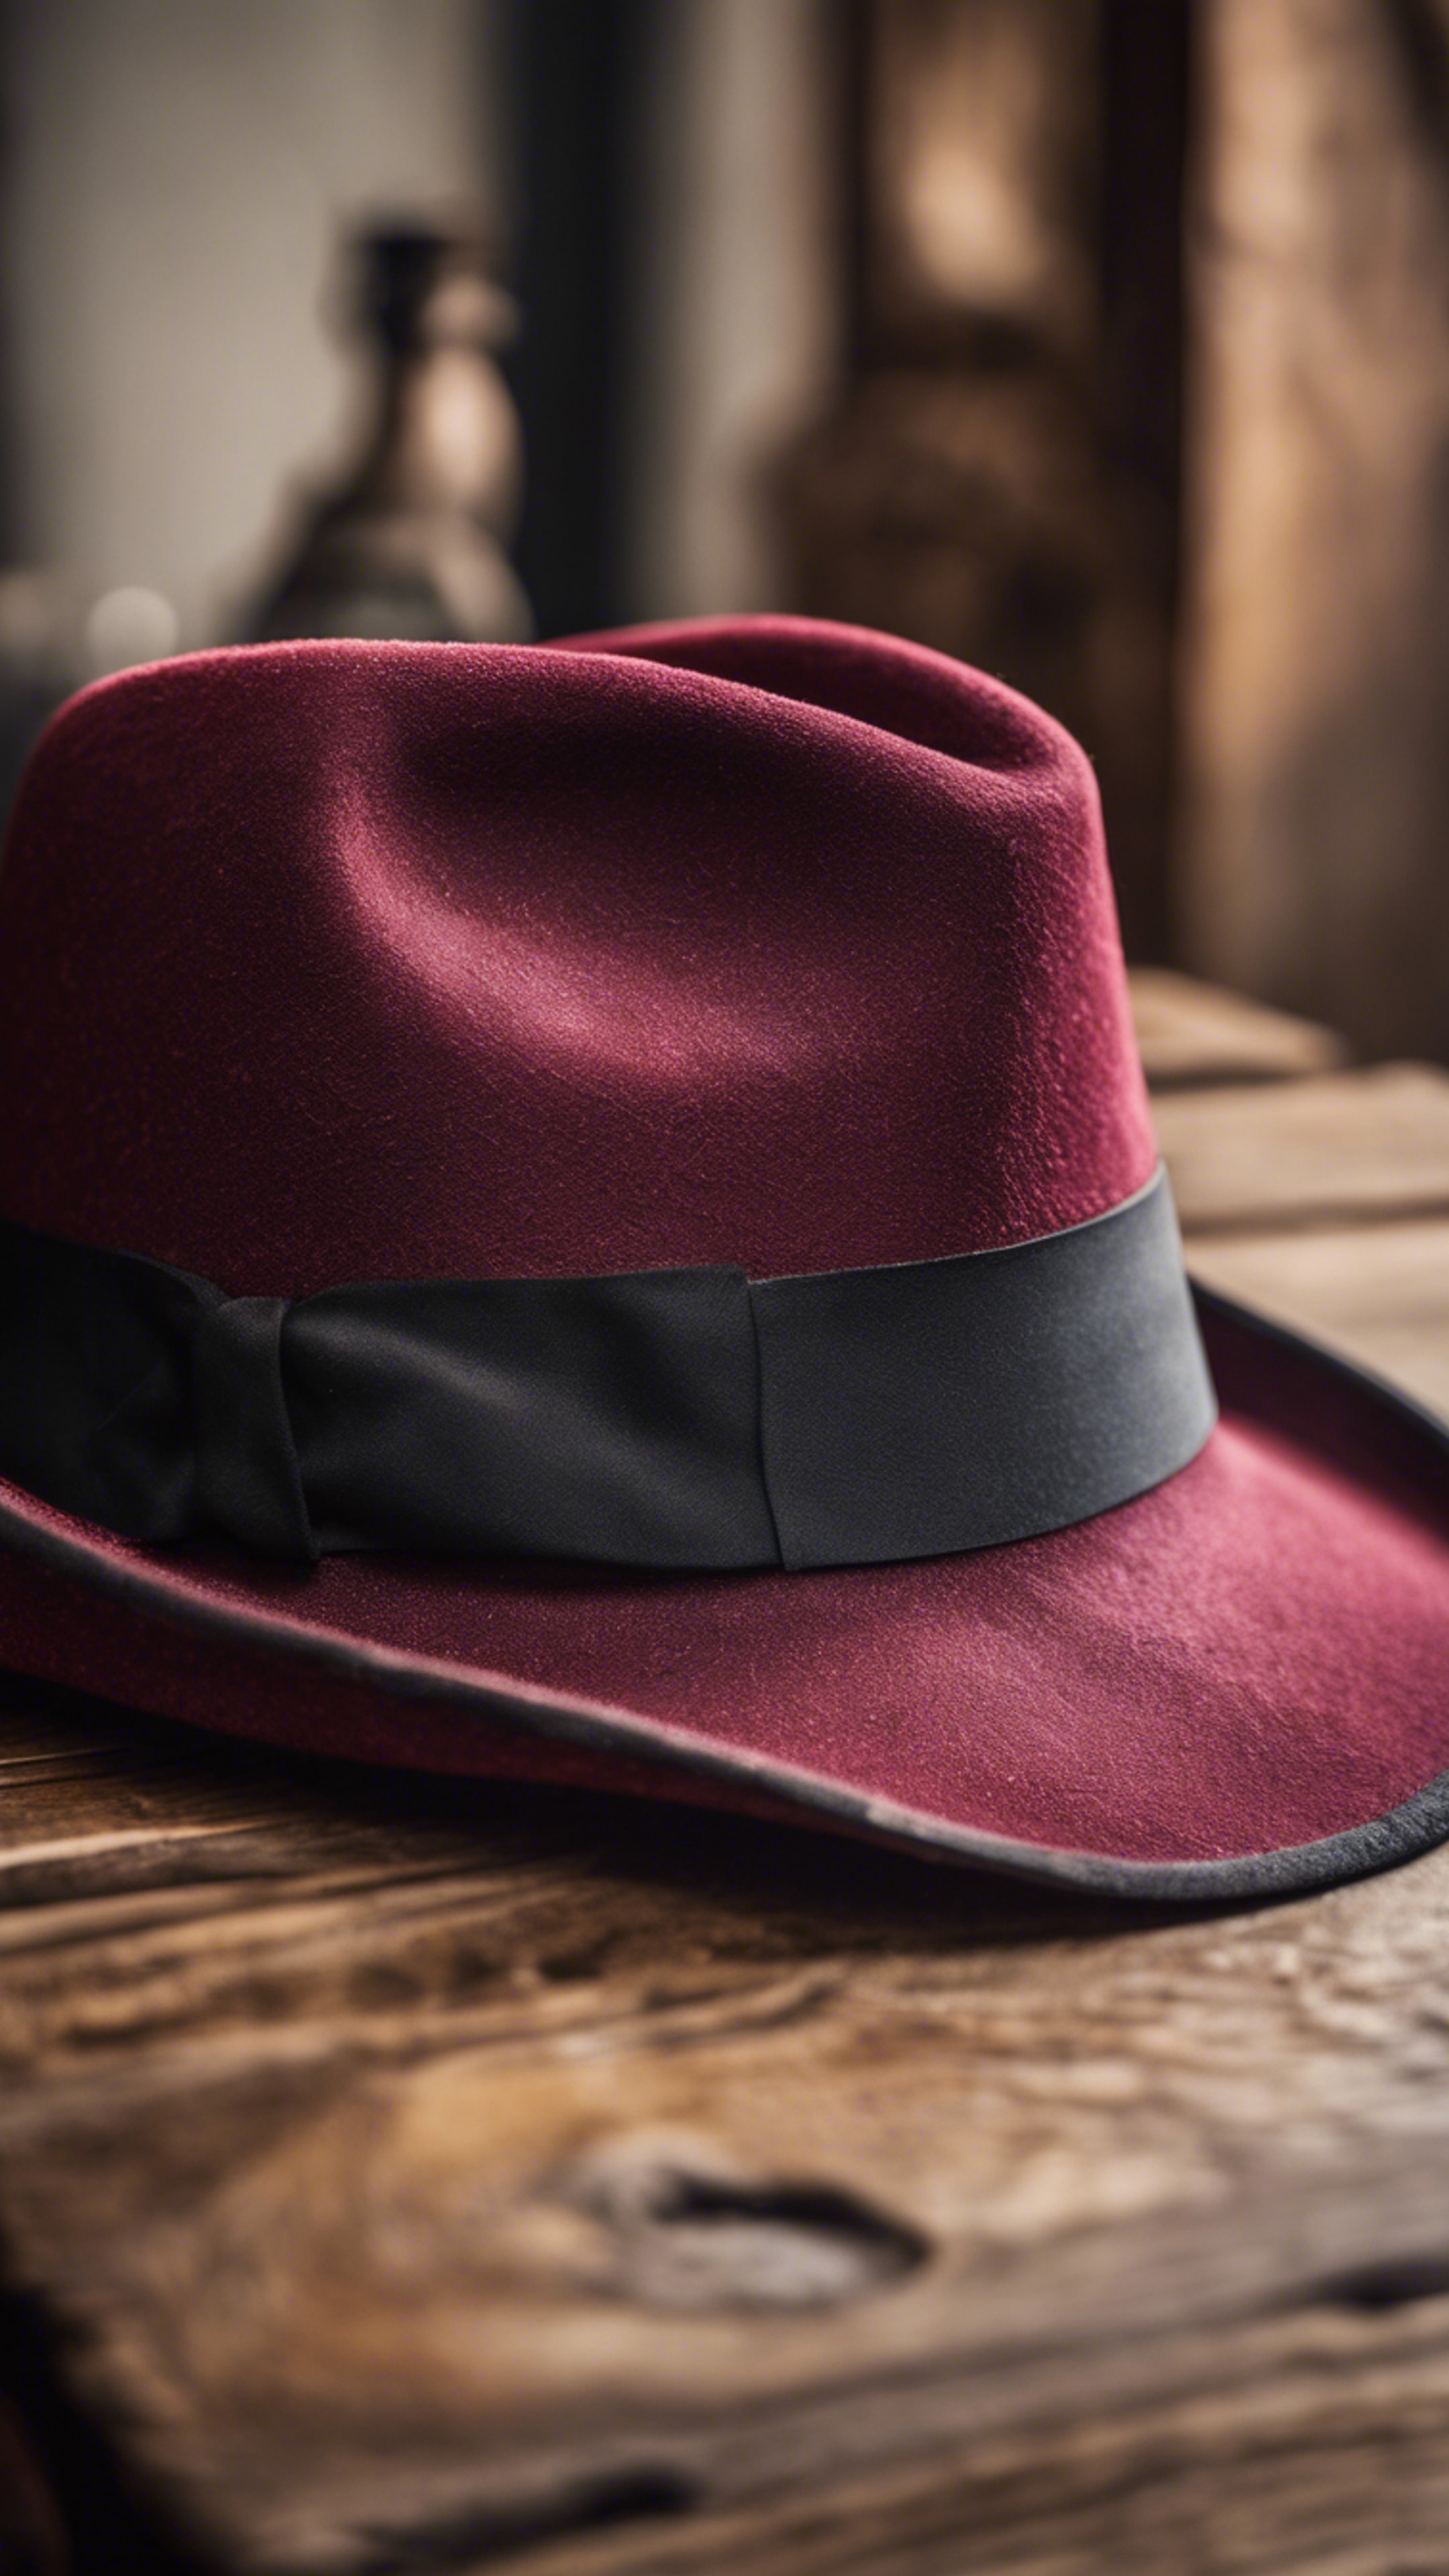 A cool maroon fedora hat positioned on an antique wooden table. Обои[05b3f475f93c4ade83cc]